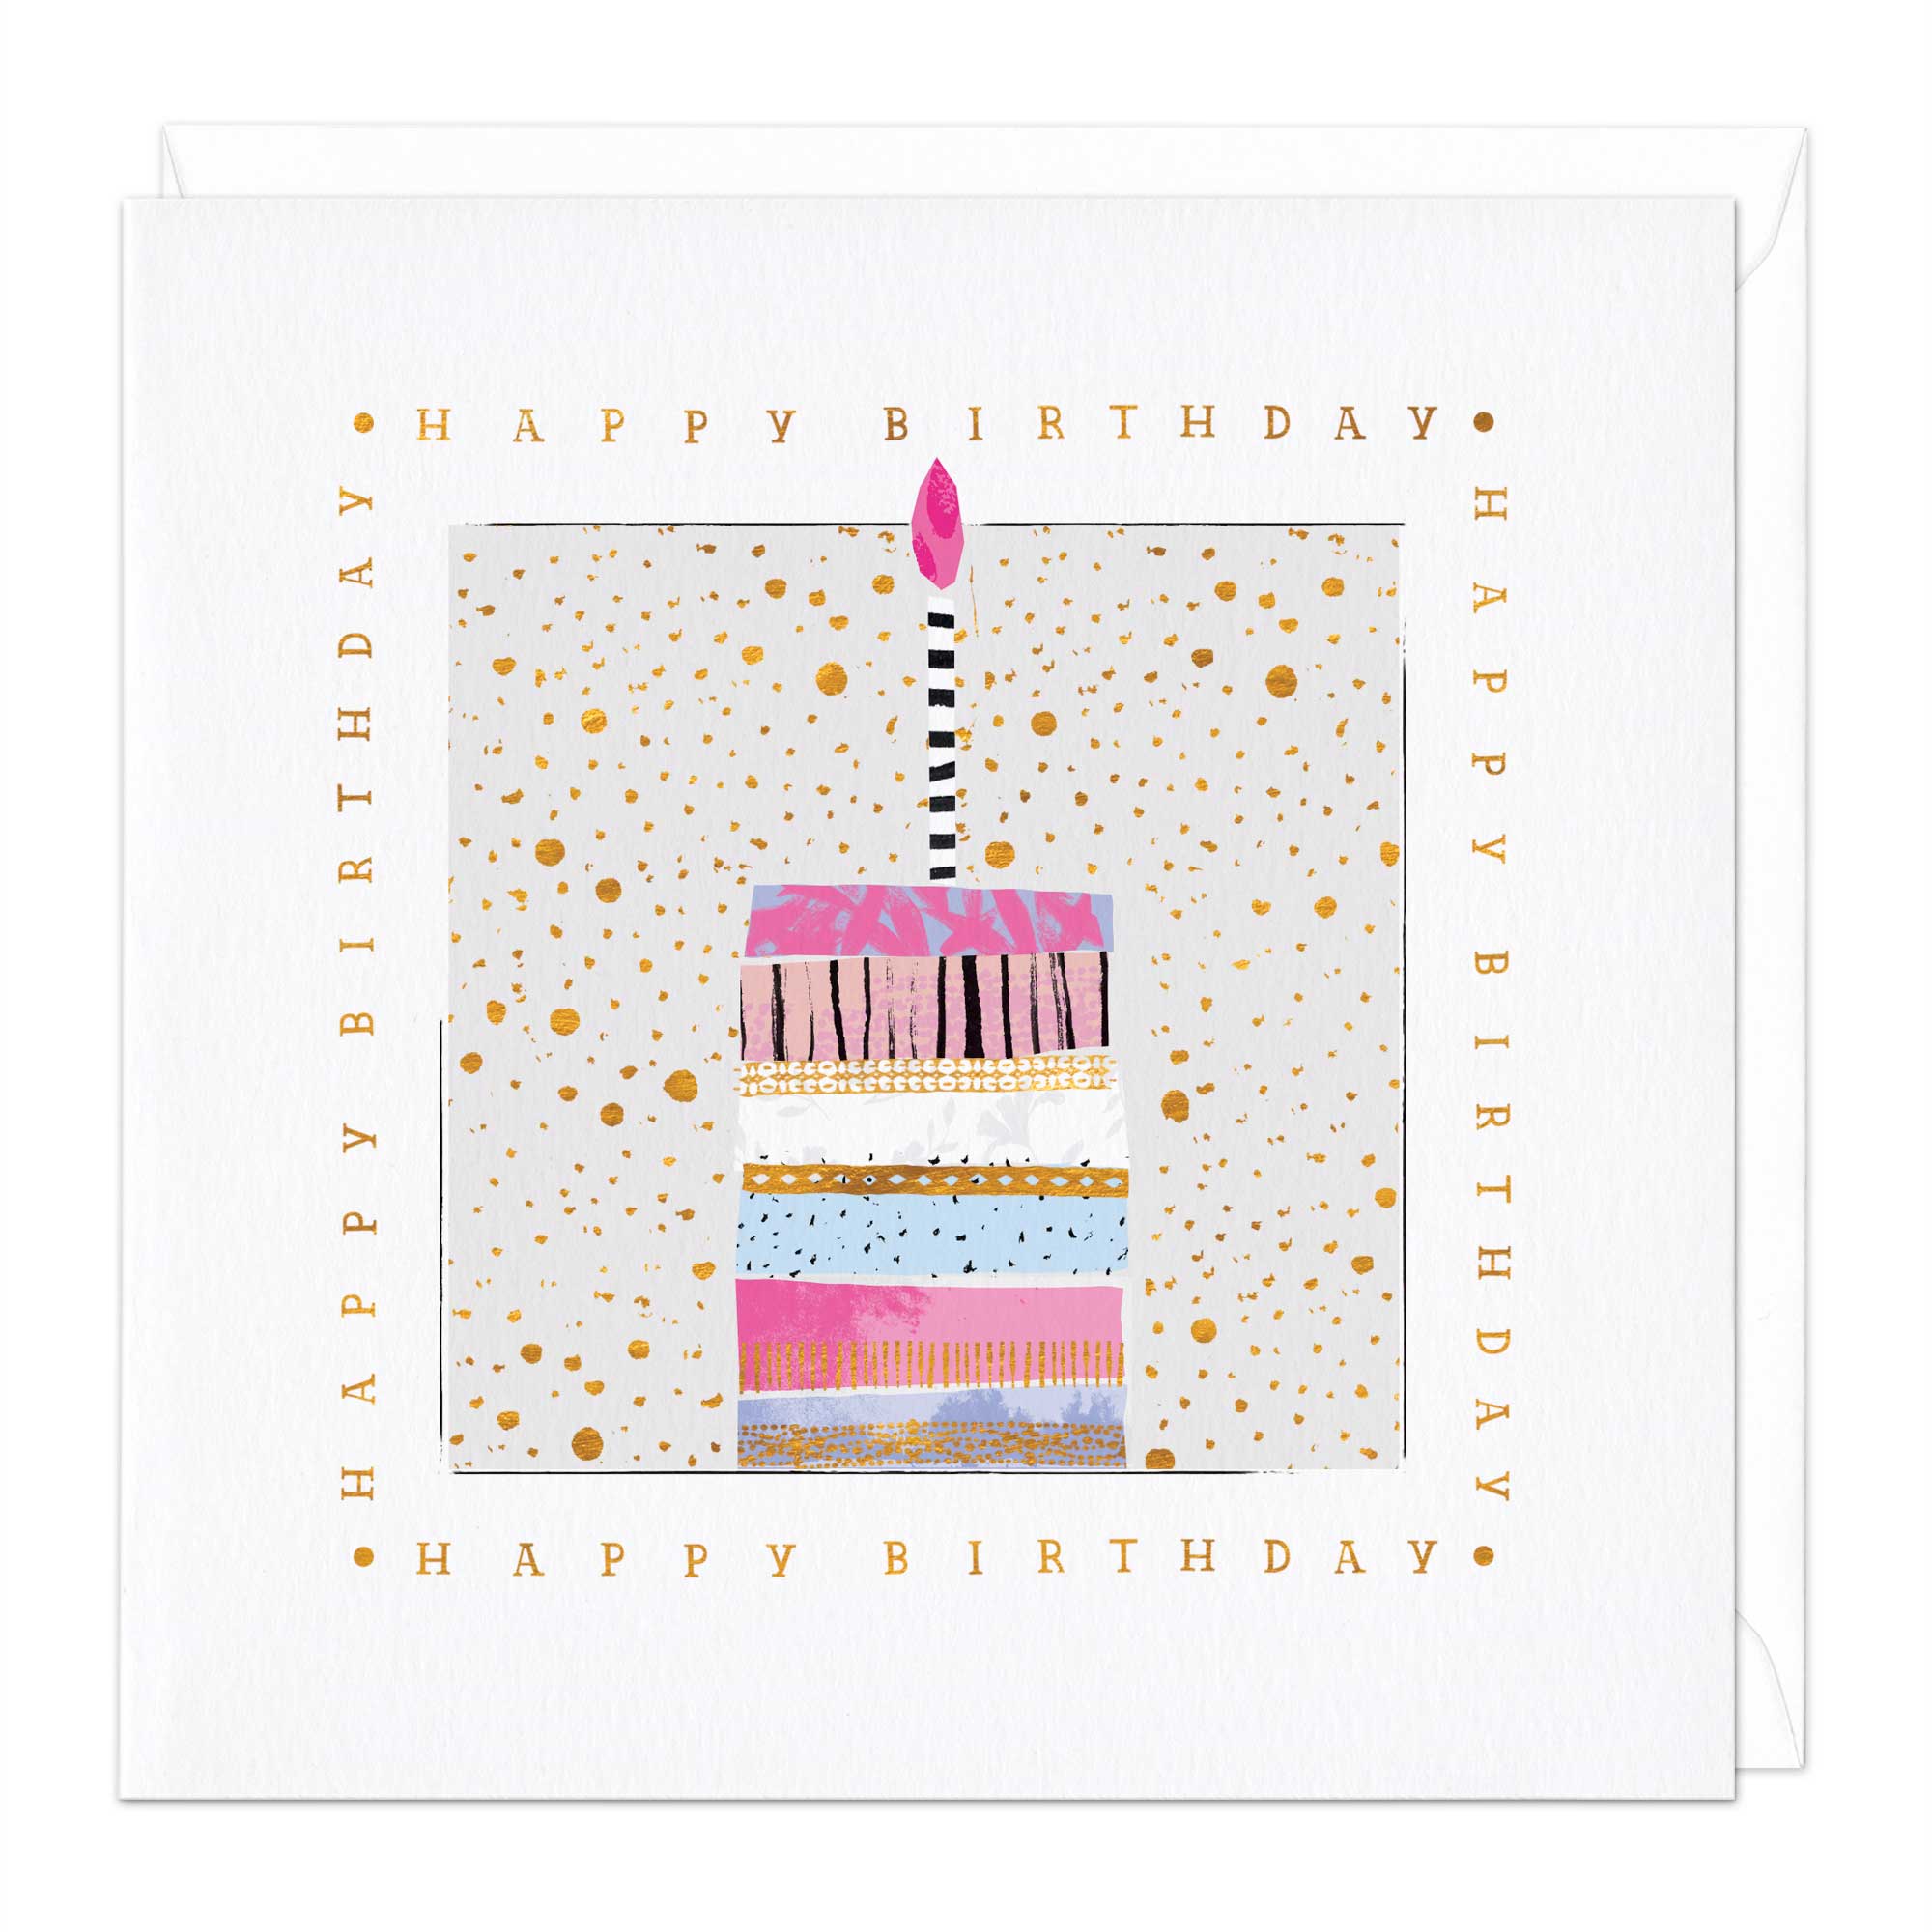 Small Cake And Candle Birthday Card